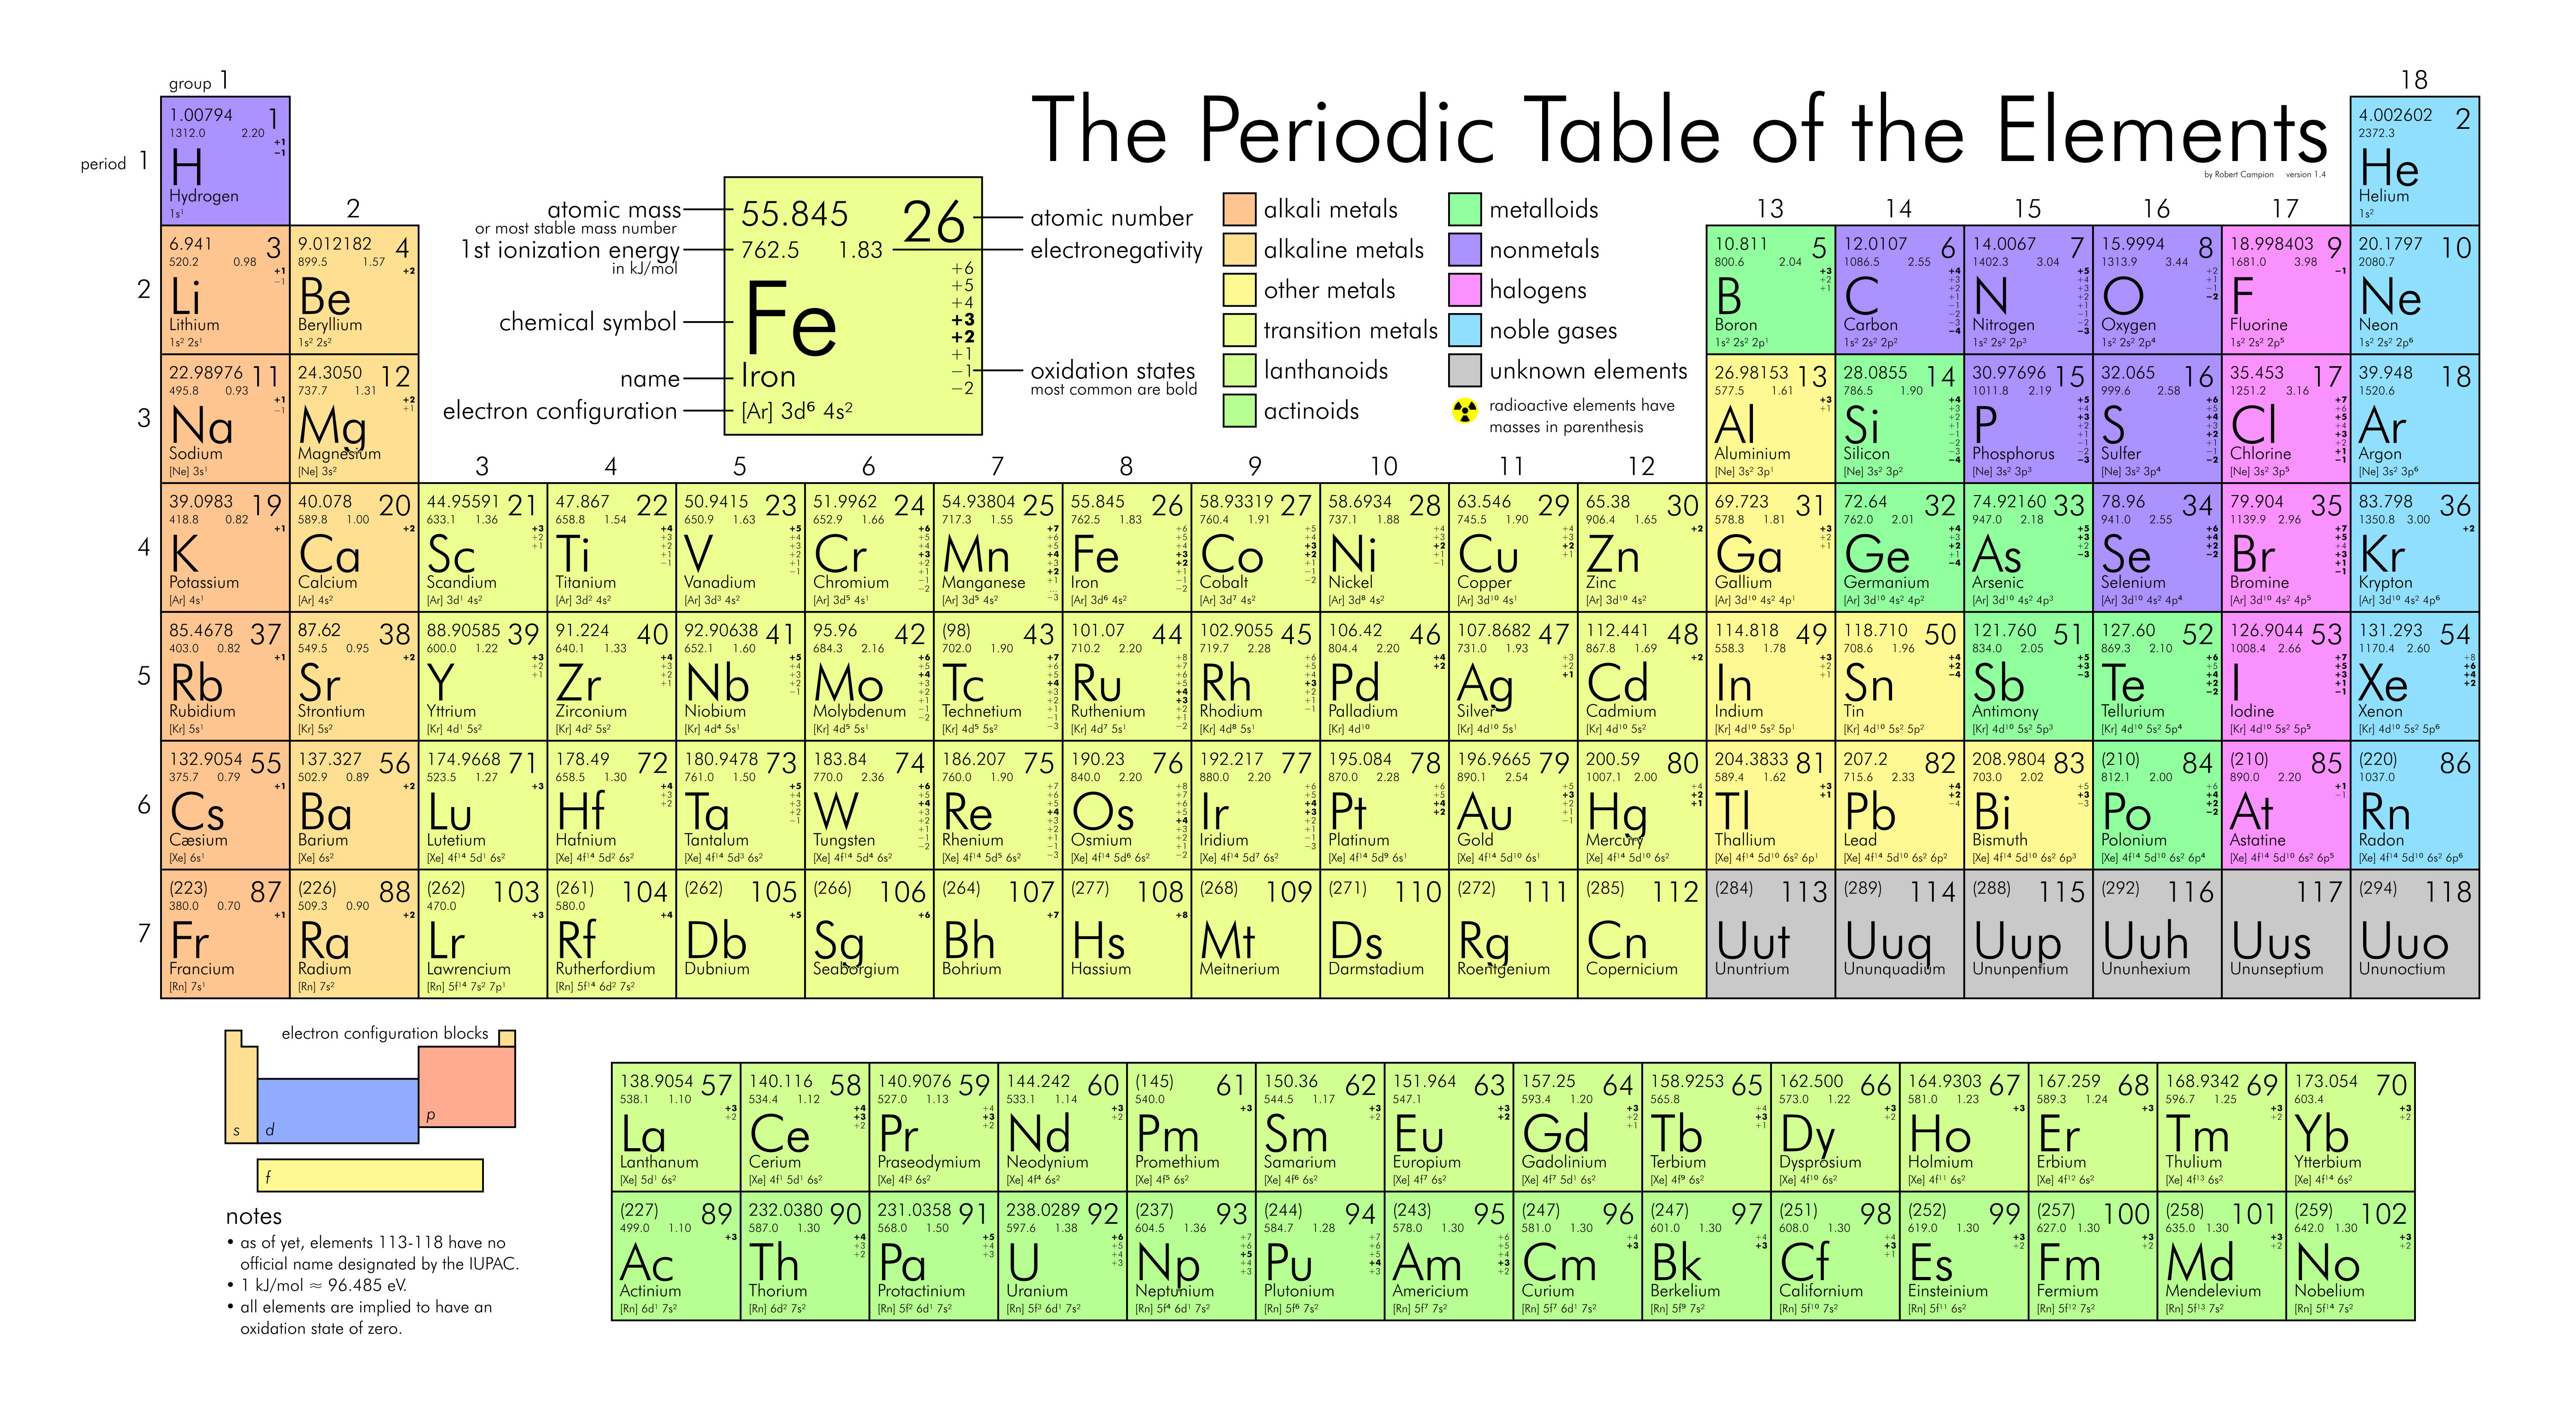 Periodic_table_large.png